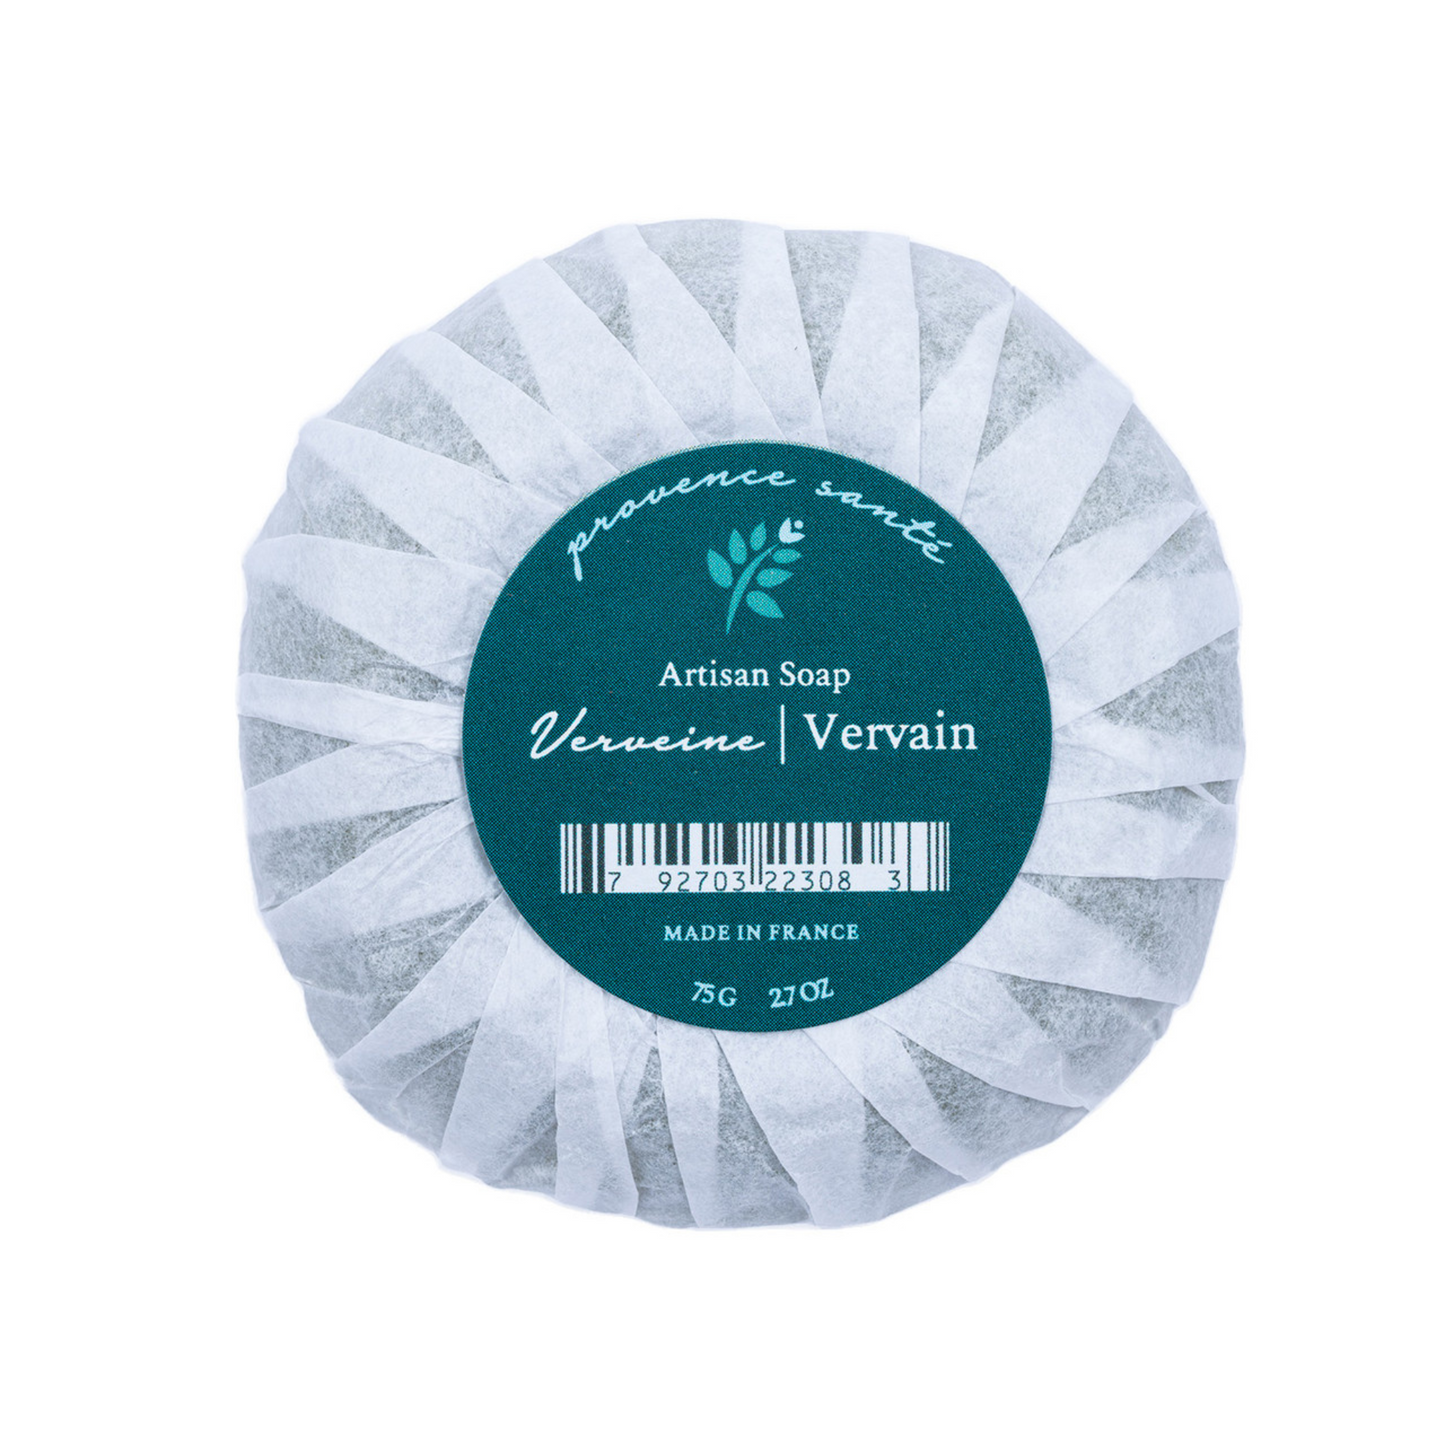 Primary image of Vervain Gift Soap